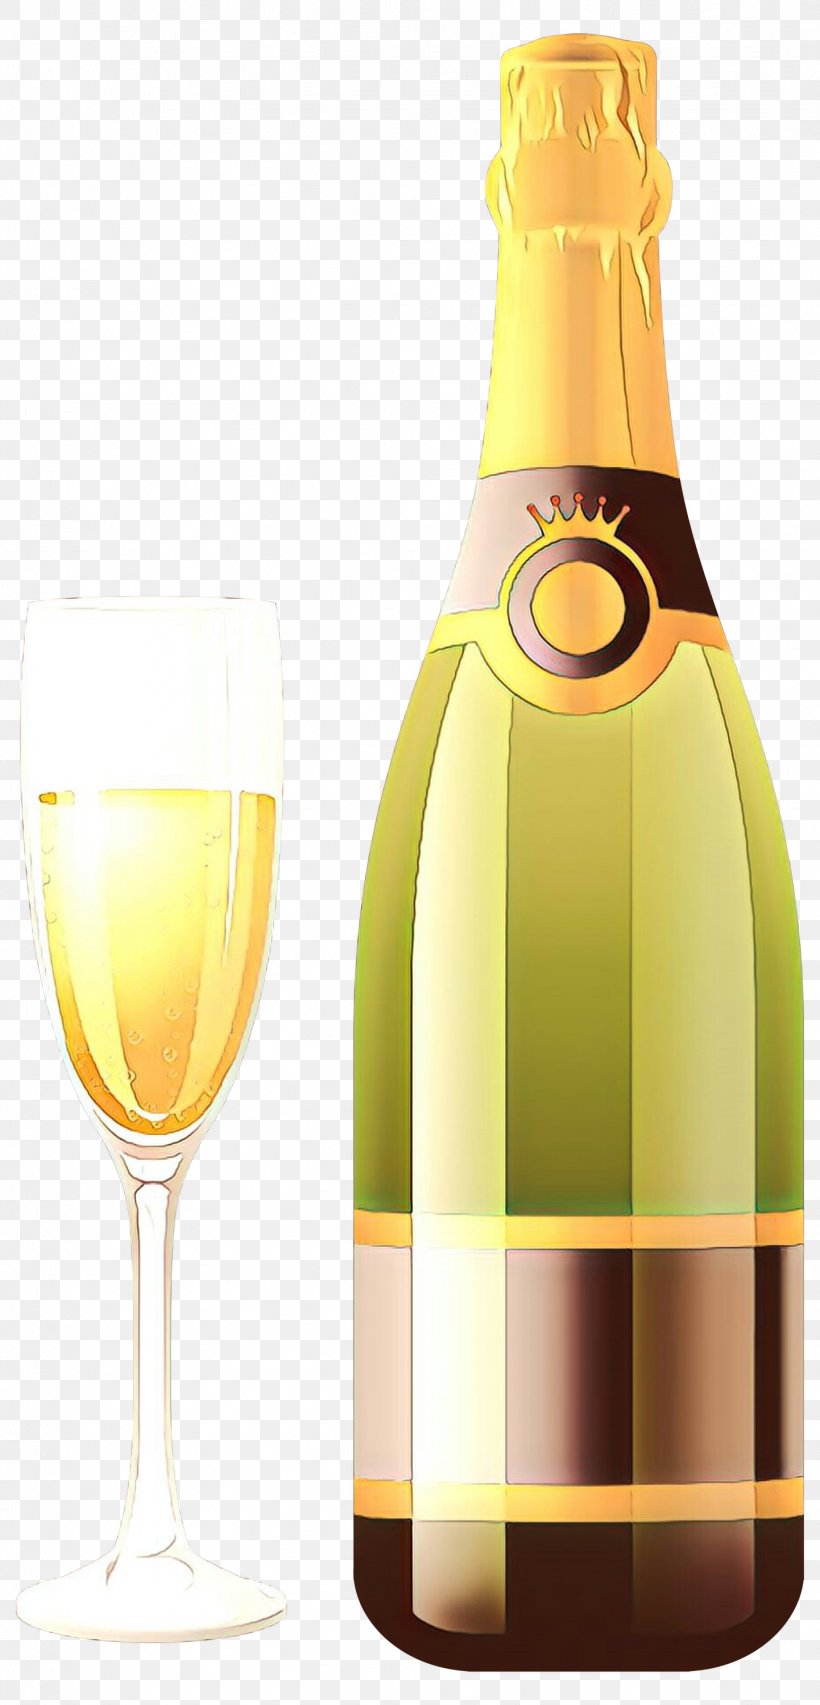 Champagne Bottle, PNG, 1442x3000px, Cartoon, Alcohol, Alcoholic Beverage, Barware, Bottle Download Free